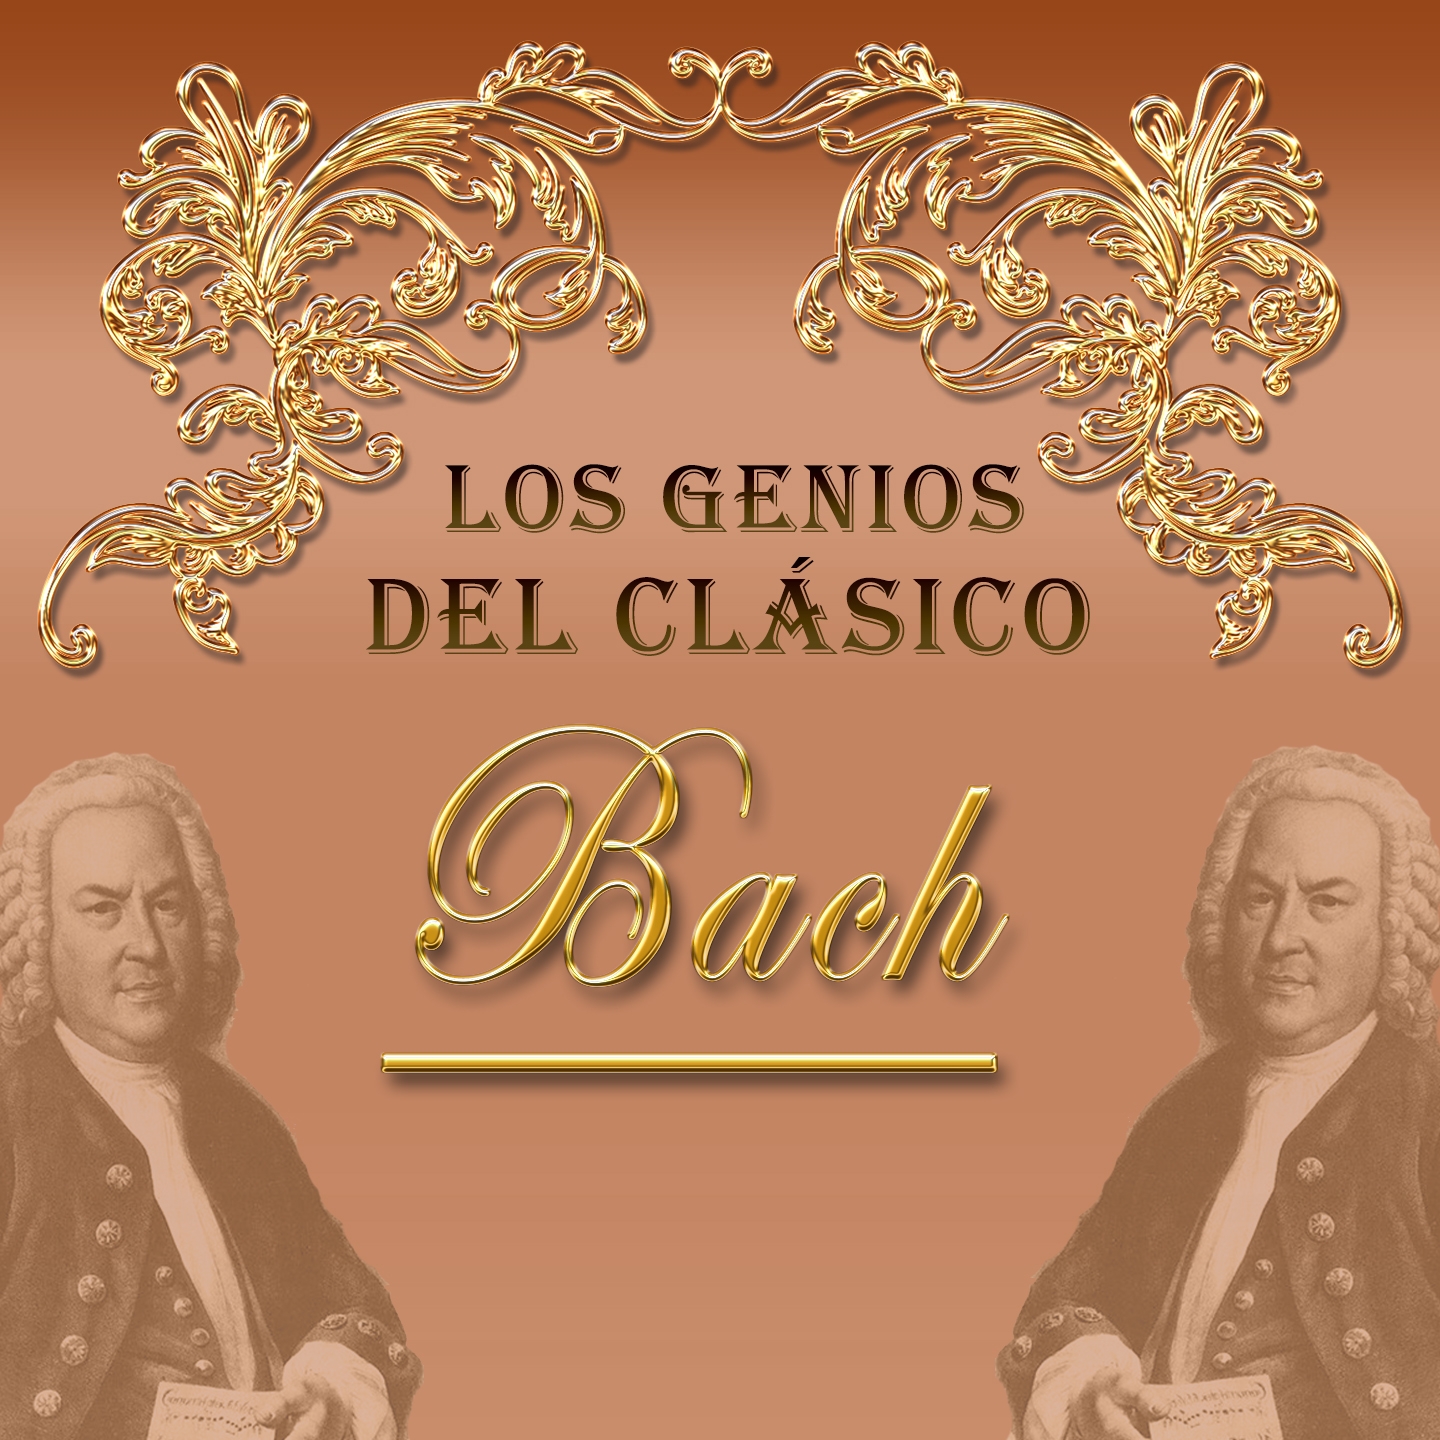 Suite No. 1 in C Major, BWV 1066: I. Ouverture